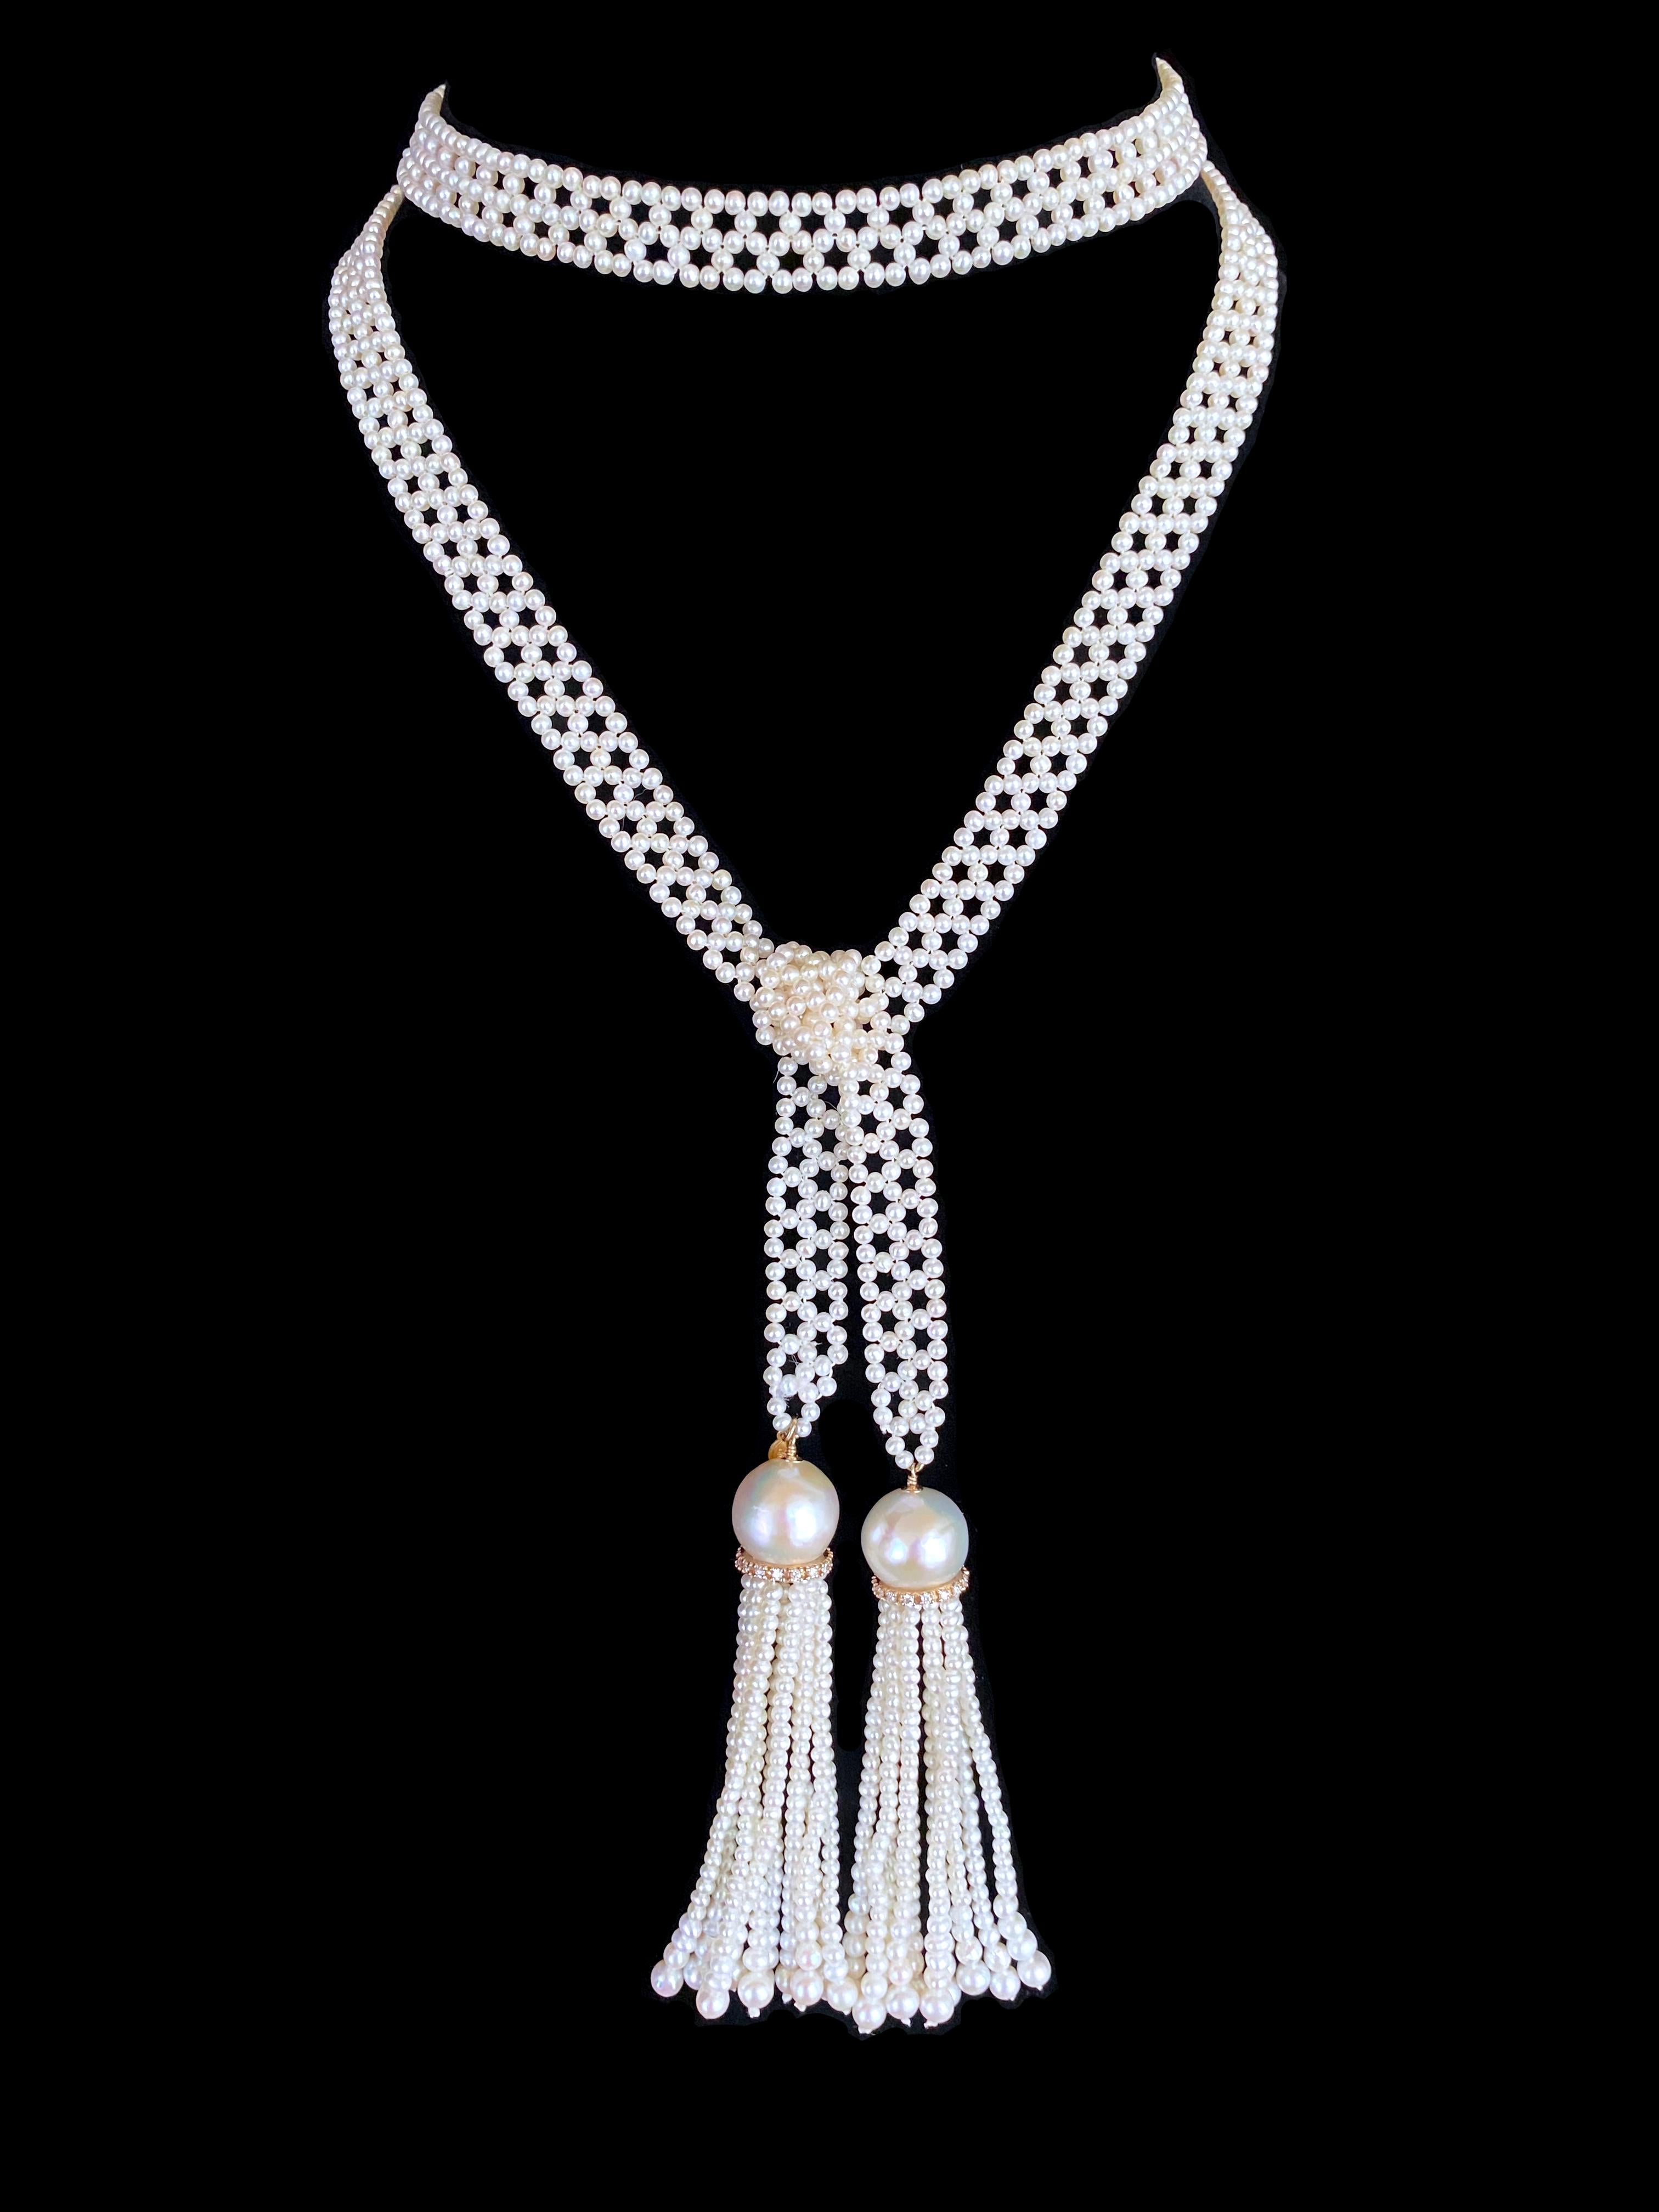 Beautiful and elegant classic Sautoir by Marina J. This Sautoir features perfect seed Pearls all intricately woven together into a fine lace like design. Measuring 37.5 inches long sans Tassels, this Sautoir is easily worn in multiple fashions, as